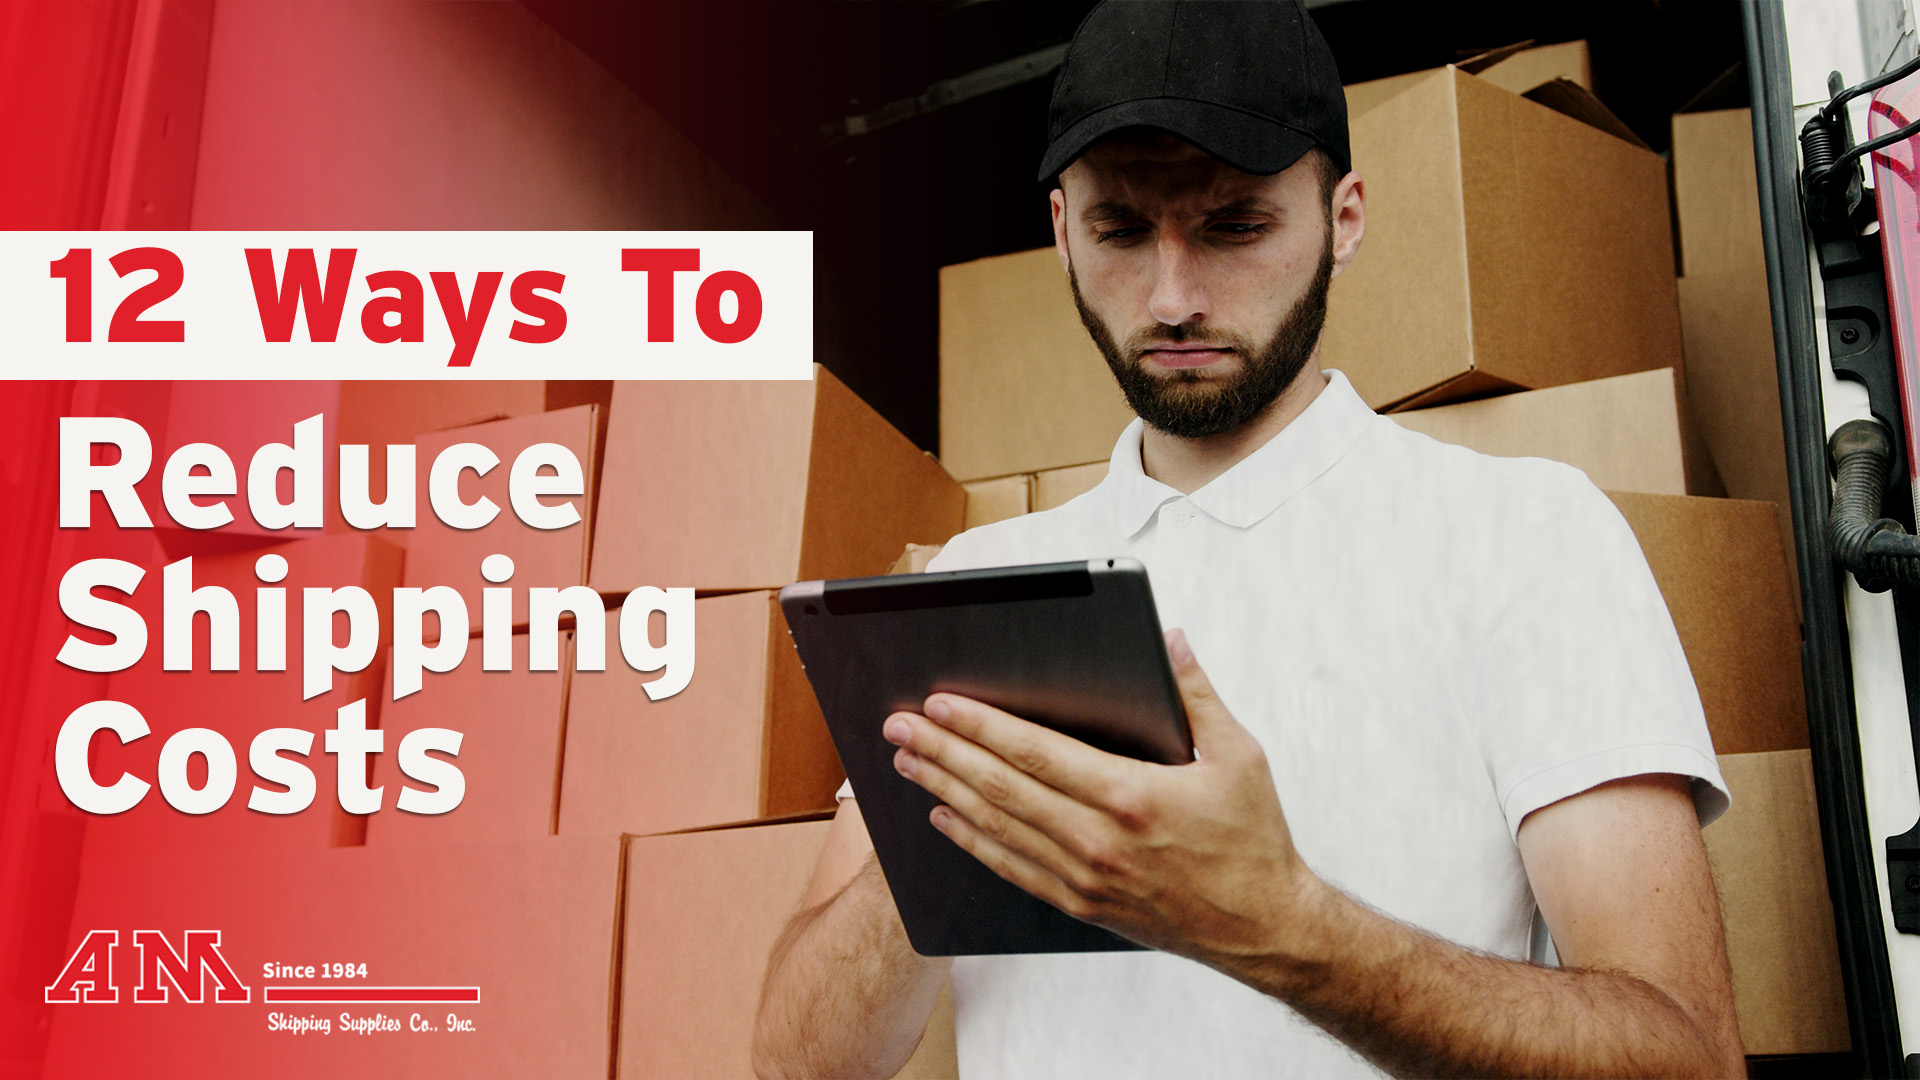 12 Ways to Reduce Shipping Costs